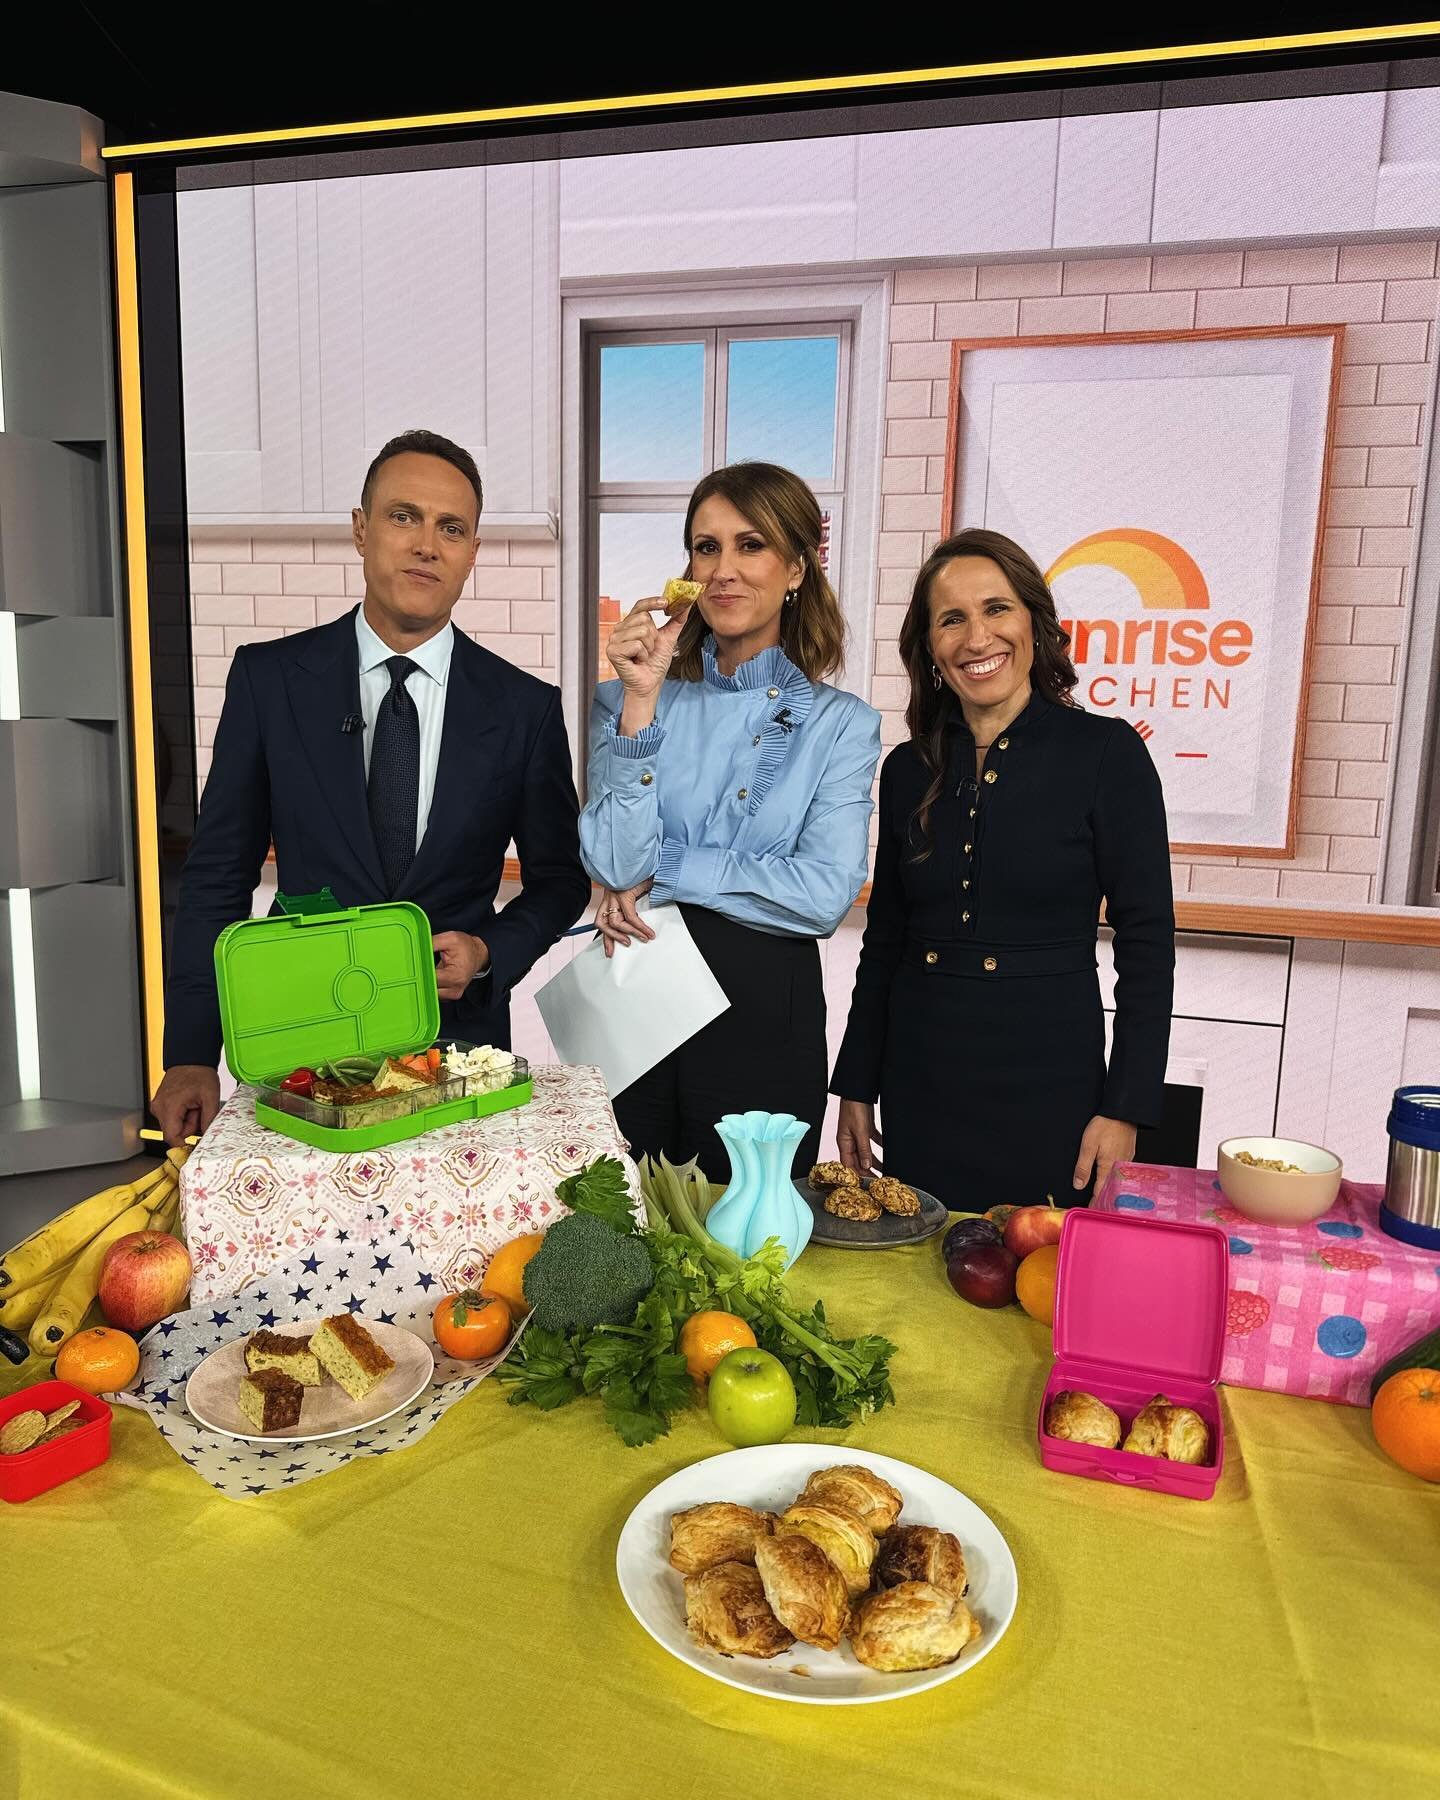 So fun to be back on @sunriseon7 talking about healthy recipes for kids lunch boxes!

  @natalie_barr7 @mattshirvo  glad you liked them ❤️it&rsquo;s always fun to chat with you both ☺️

If your kids are anything like mine, the sandwich is losing its 